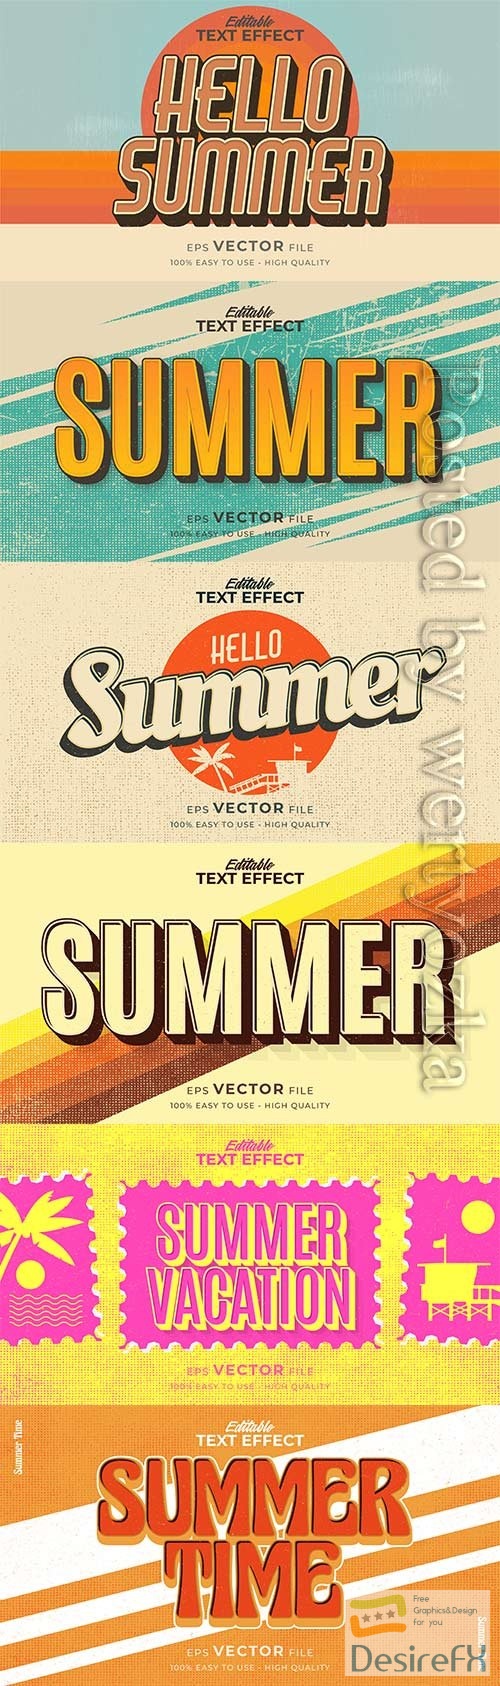 Retro summer holiday text in grunge style theme in vector